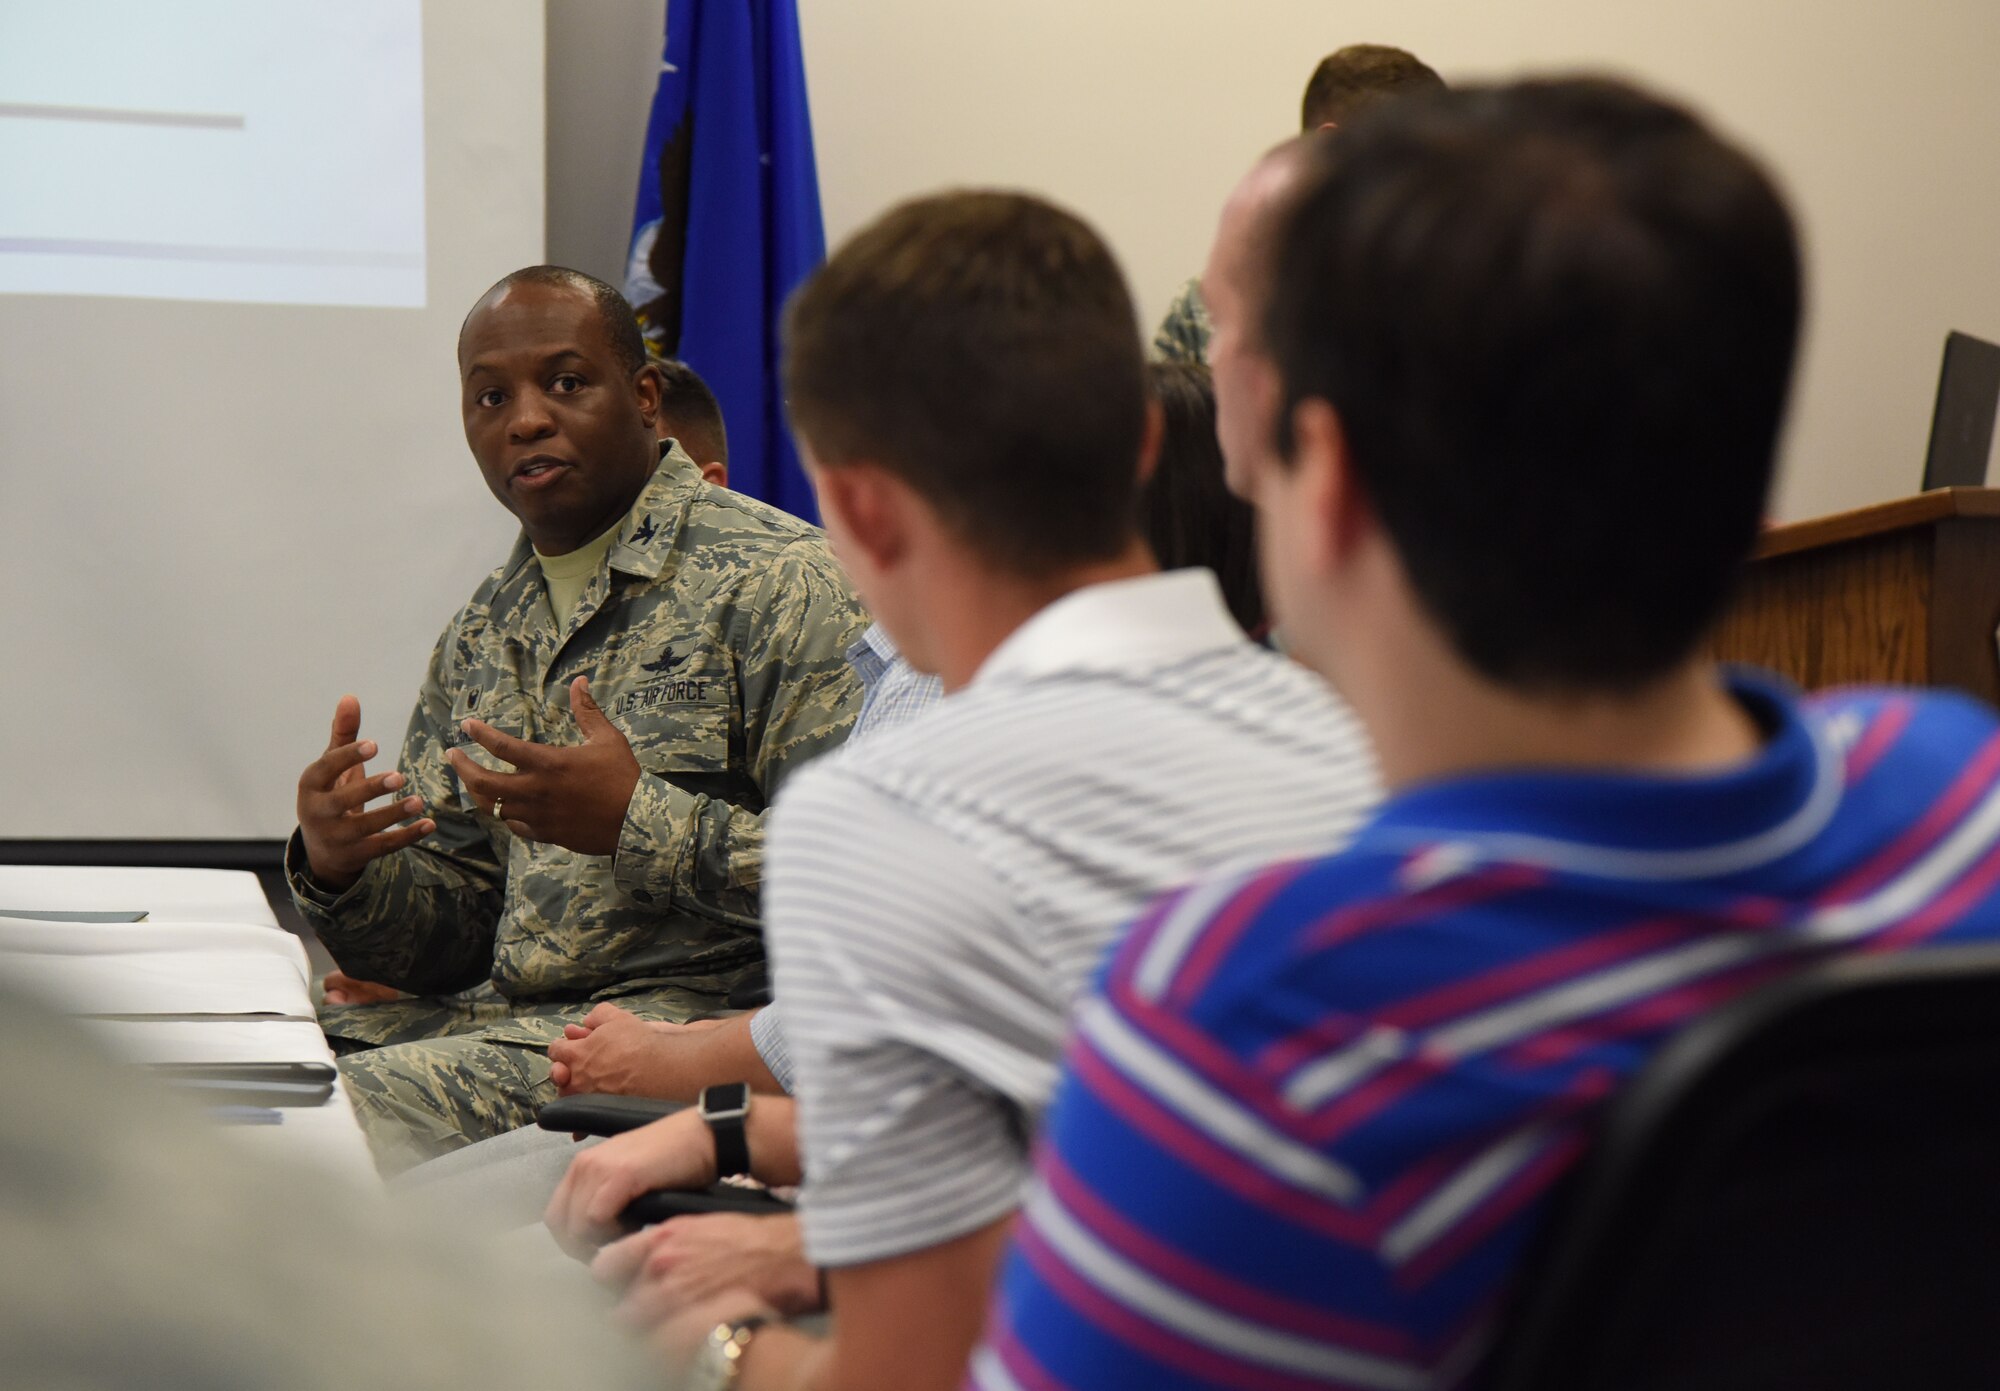 U.S. Air Force Col. Leo Lawson, Jr., 81st Training Group commander, briefs congressional staffers on training innovation projects at the Levitow Training Support Facility on Keesler Air Force Base, Mississippi, Aug. 6, 2018. The staffers visited Keesler from the offices of Senators Roger Wicker and Cindy Hyde-Smith and Congressman Trent Kelly to receive an overview of the 81st Training Wing to identify areas which could use congressional support. (U.S. Air Force photo by Kemberly Groue)